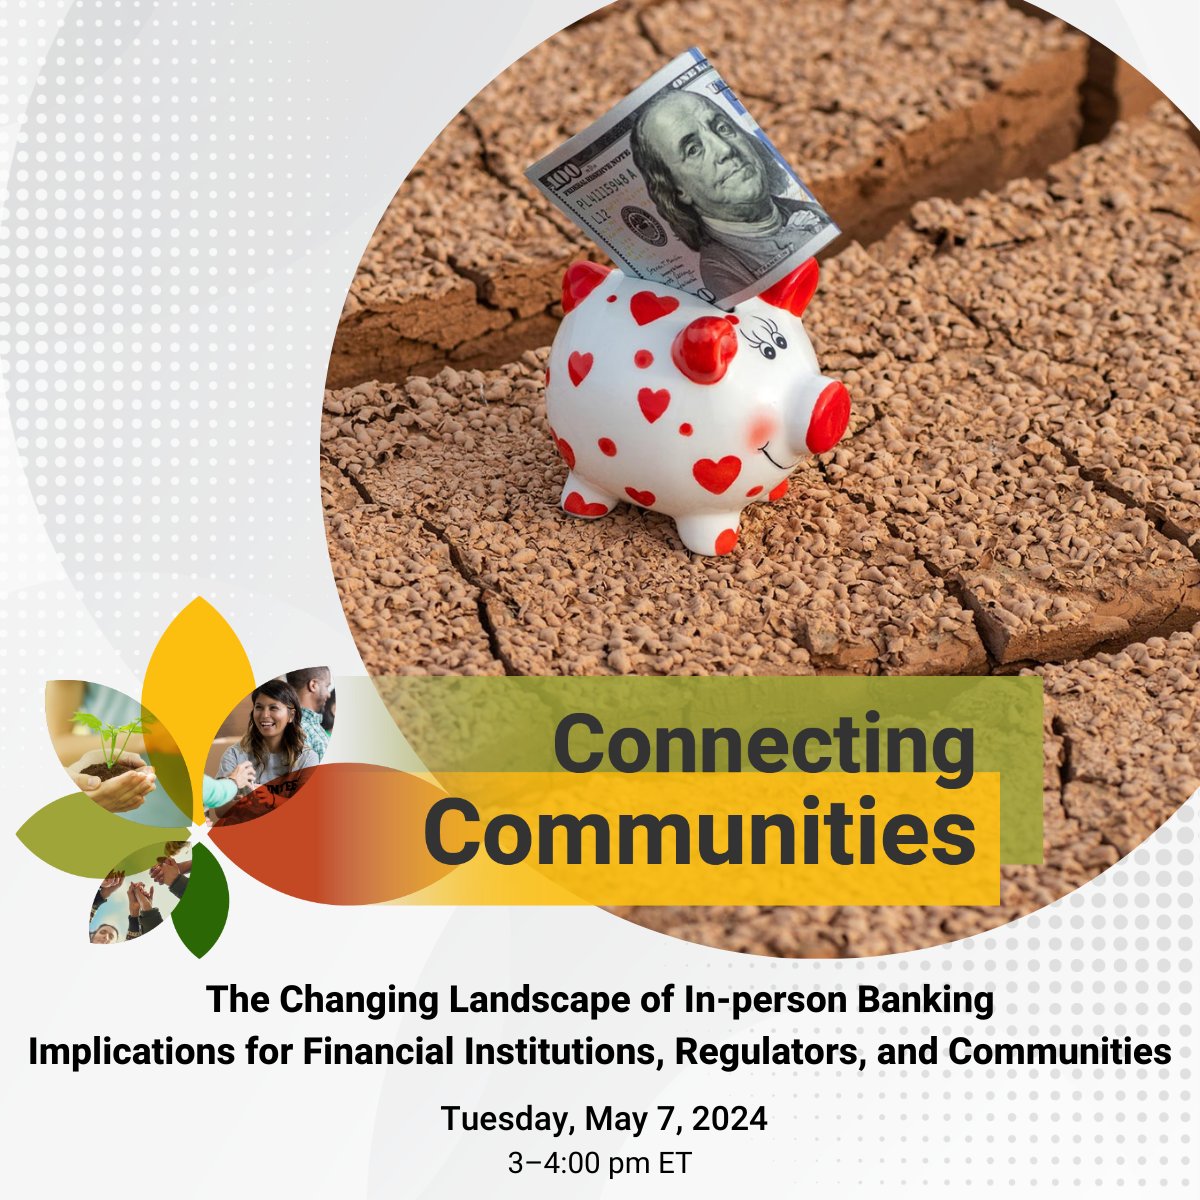 Ready for another #ConnectingCommunities webinar? On May 7, join us for Connecting Communities: The Changing Landscape of In-person Banking: Implications for Financial Institutions, Regulators, and Communities. Register now: bit.ly/3xkqq99